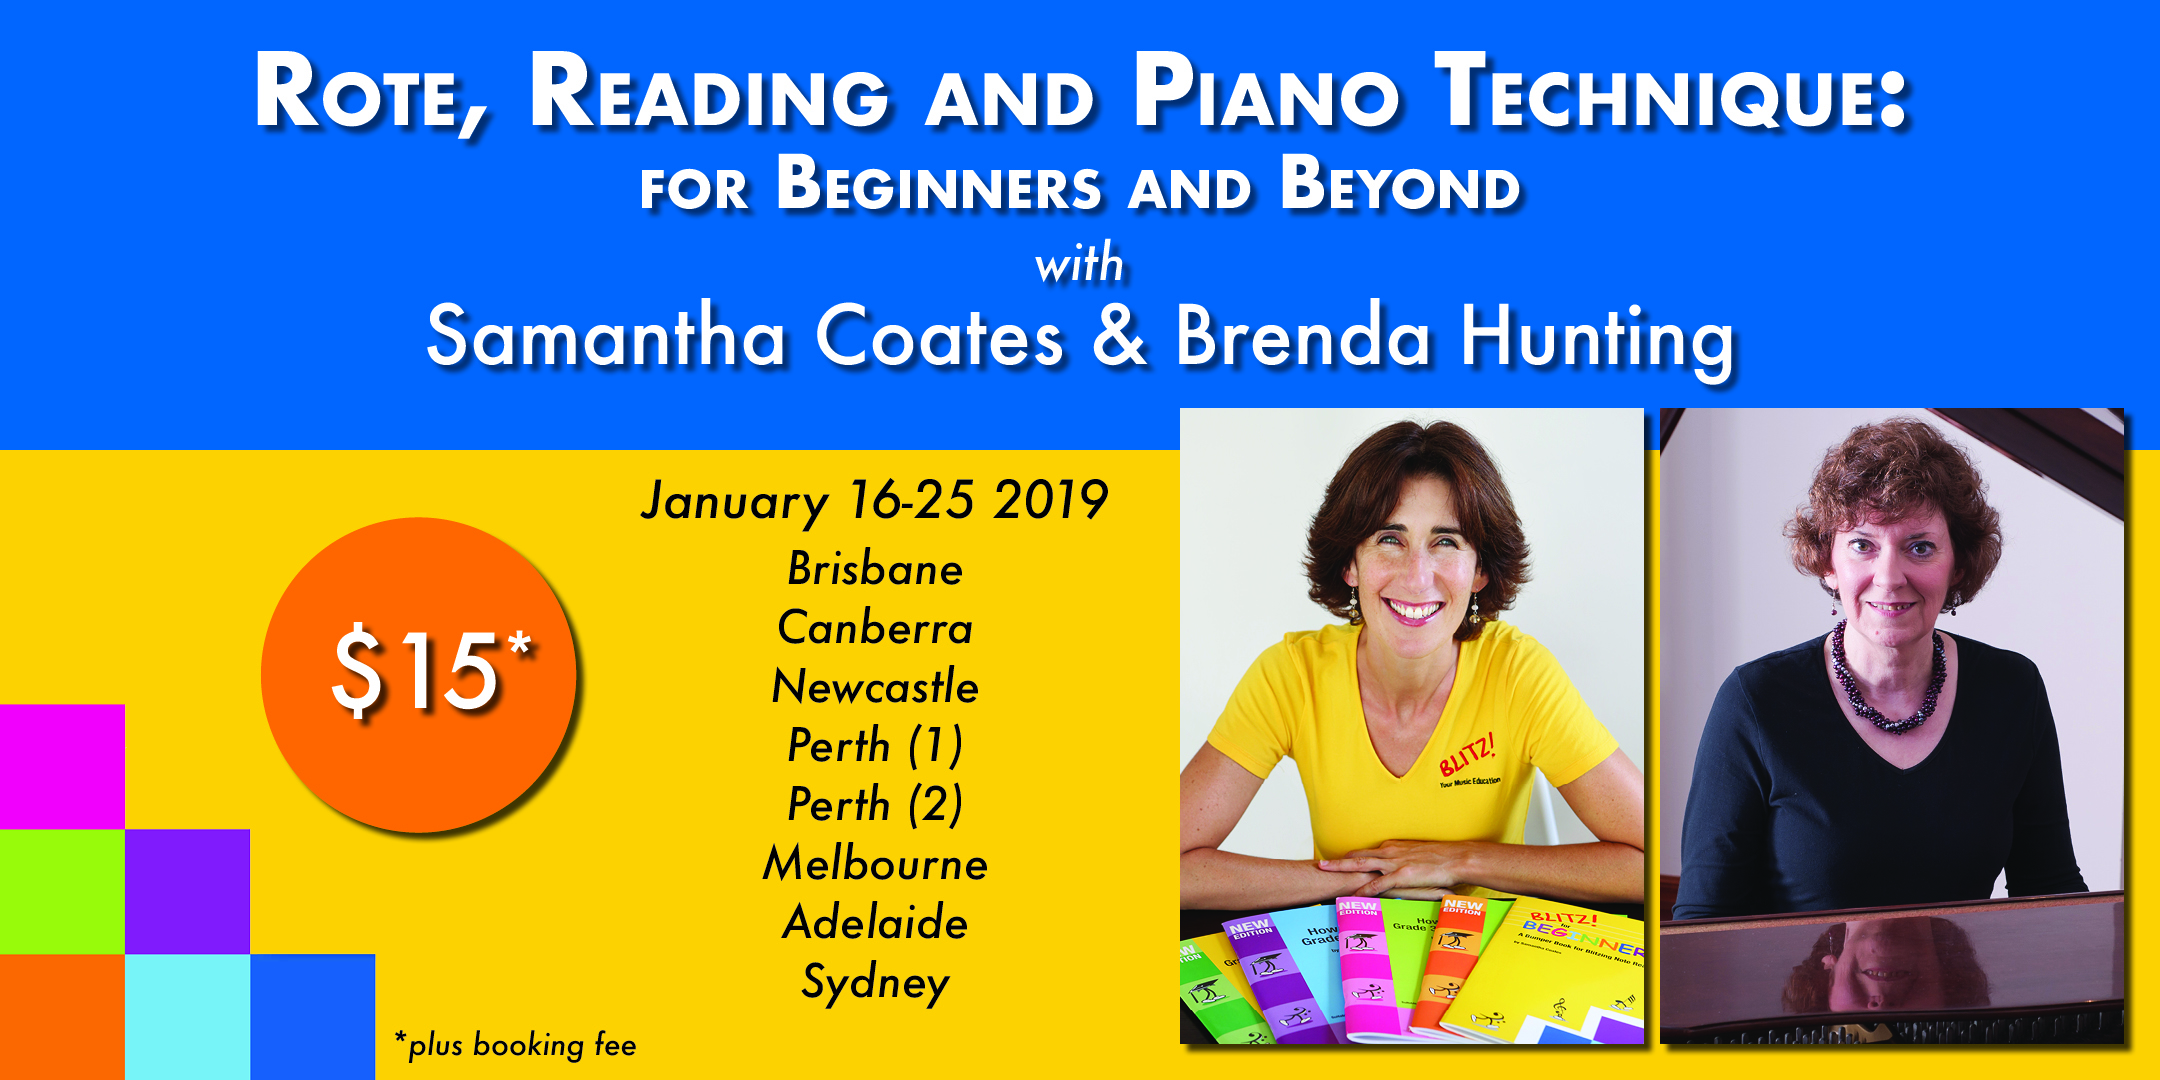 Rote Reading and Piano Technique: For Beginners and Beyond